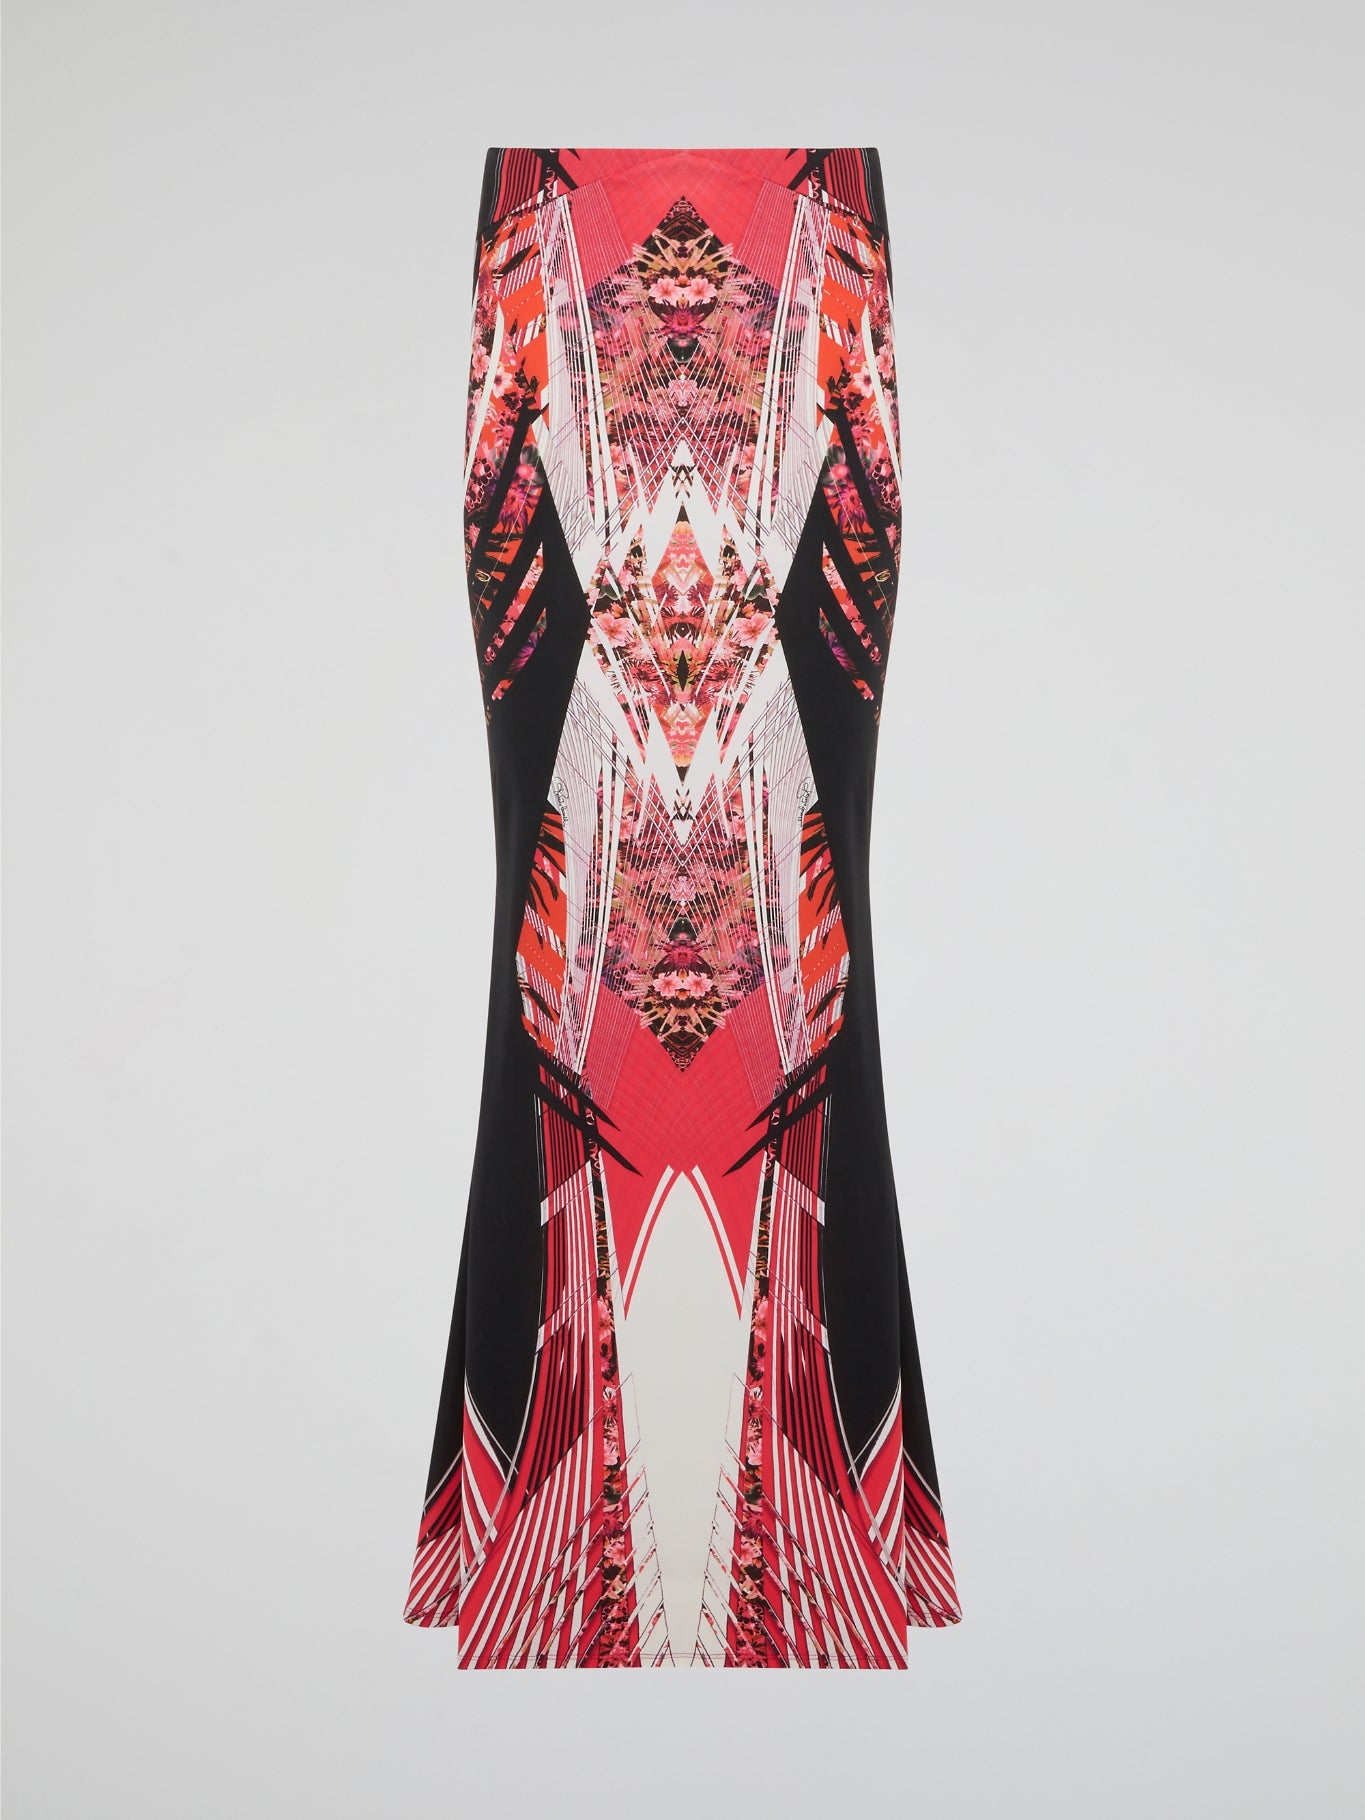 Feel like a modern-day goddess in this stunning red printed maxi skirt by Roberto Cavalli. The vibrant color and intricate design will make you stand out in any crowd, while the flowing silhouette adds a touch of elegance to your look. Pair it with a simple top and statement jewelry for a look that is both bold and chic.